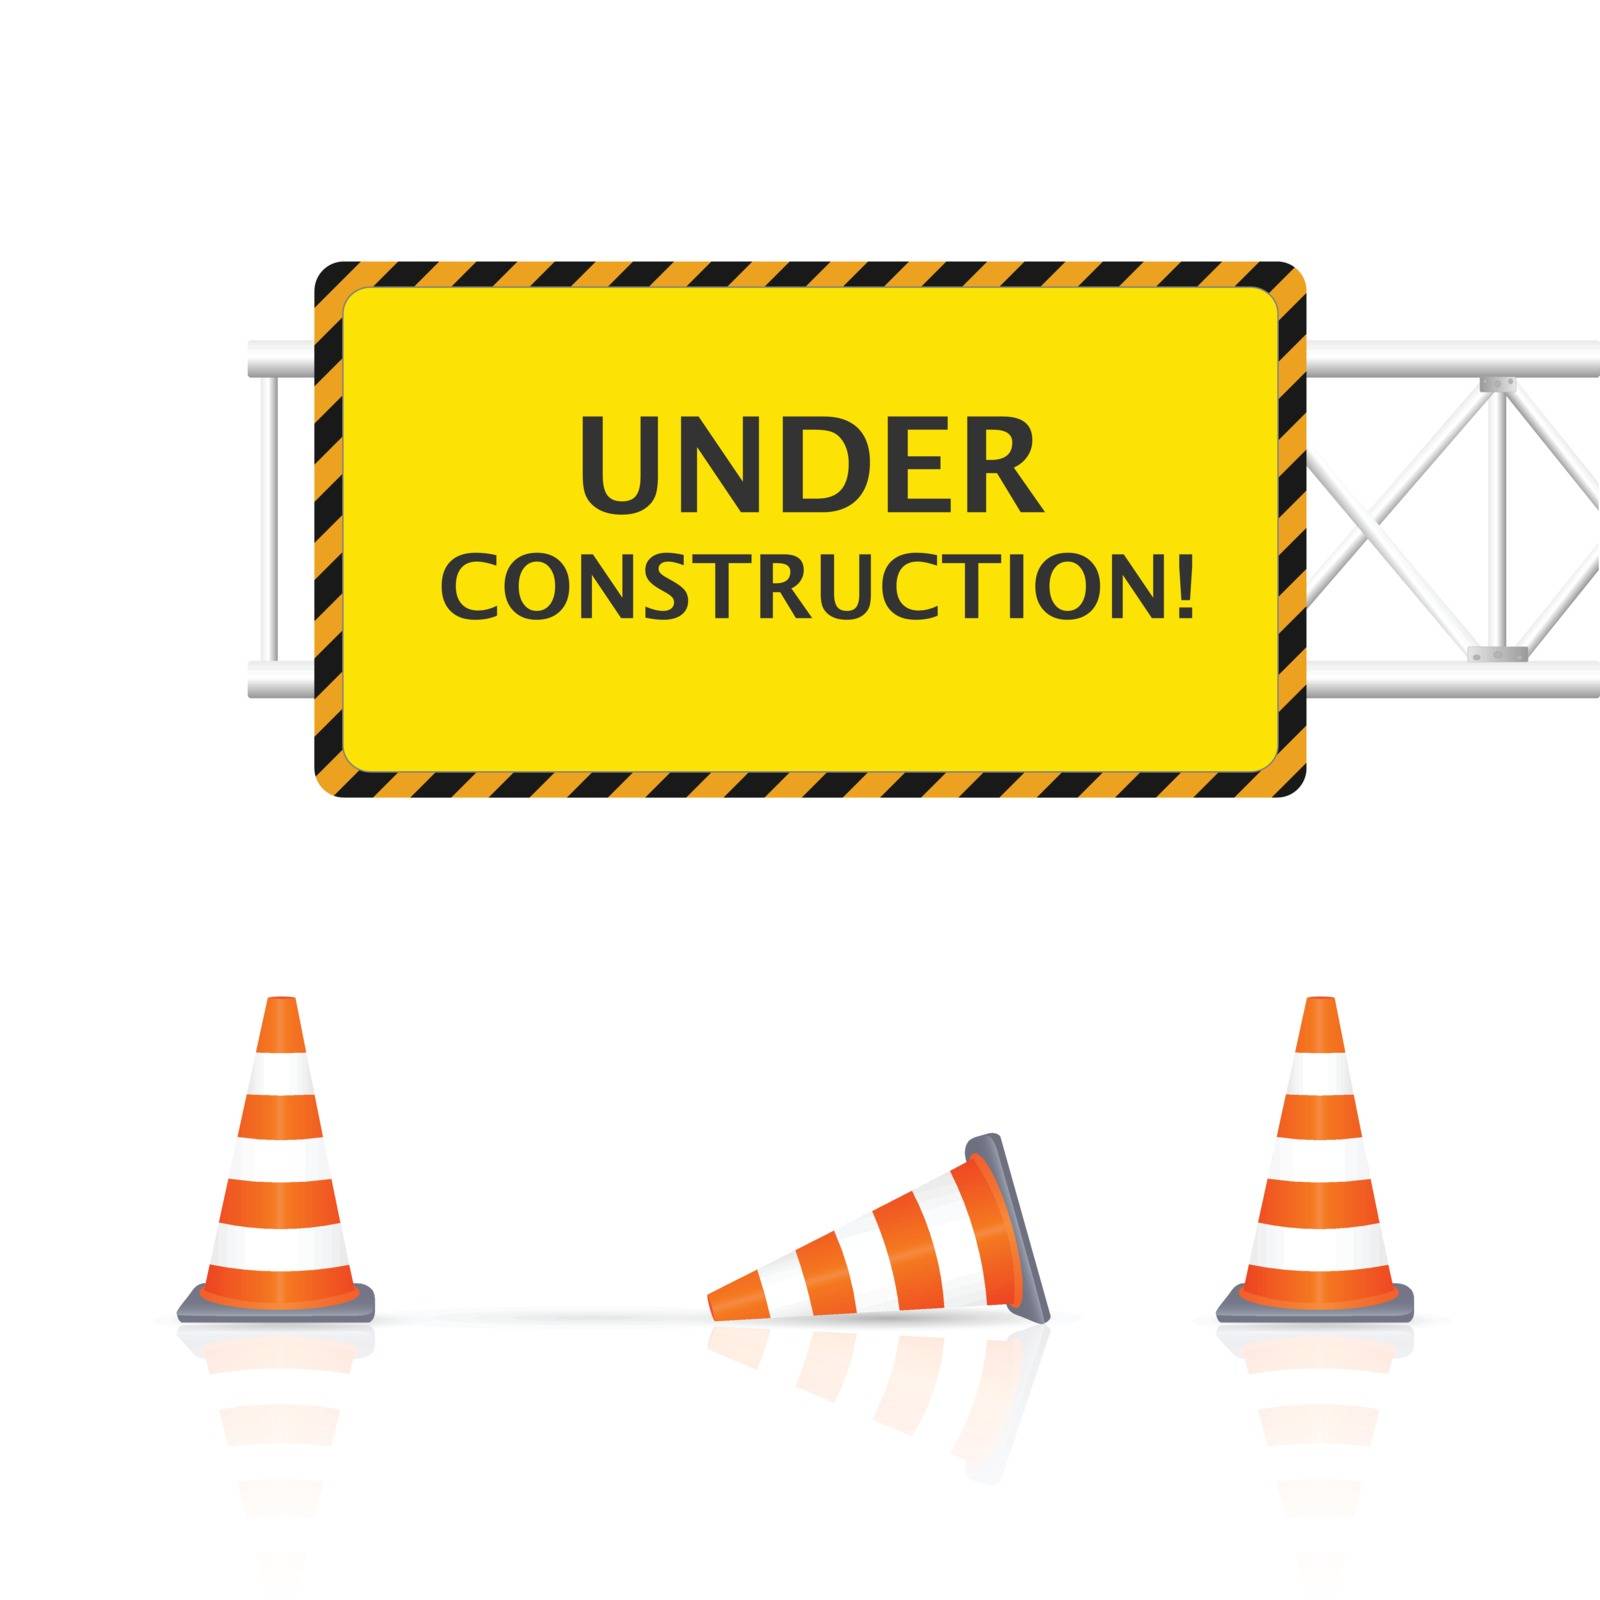 Illustration of an Under Construction sign with safety cones isolated on a white background.